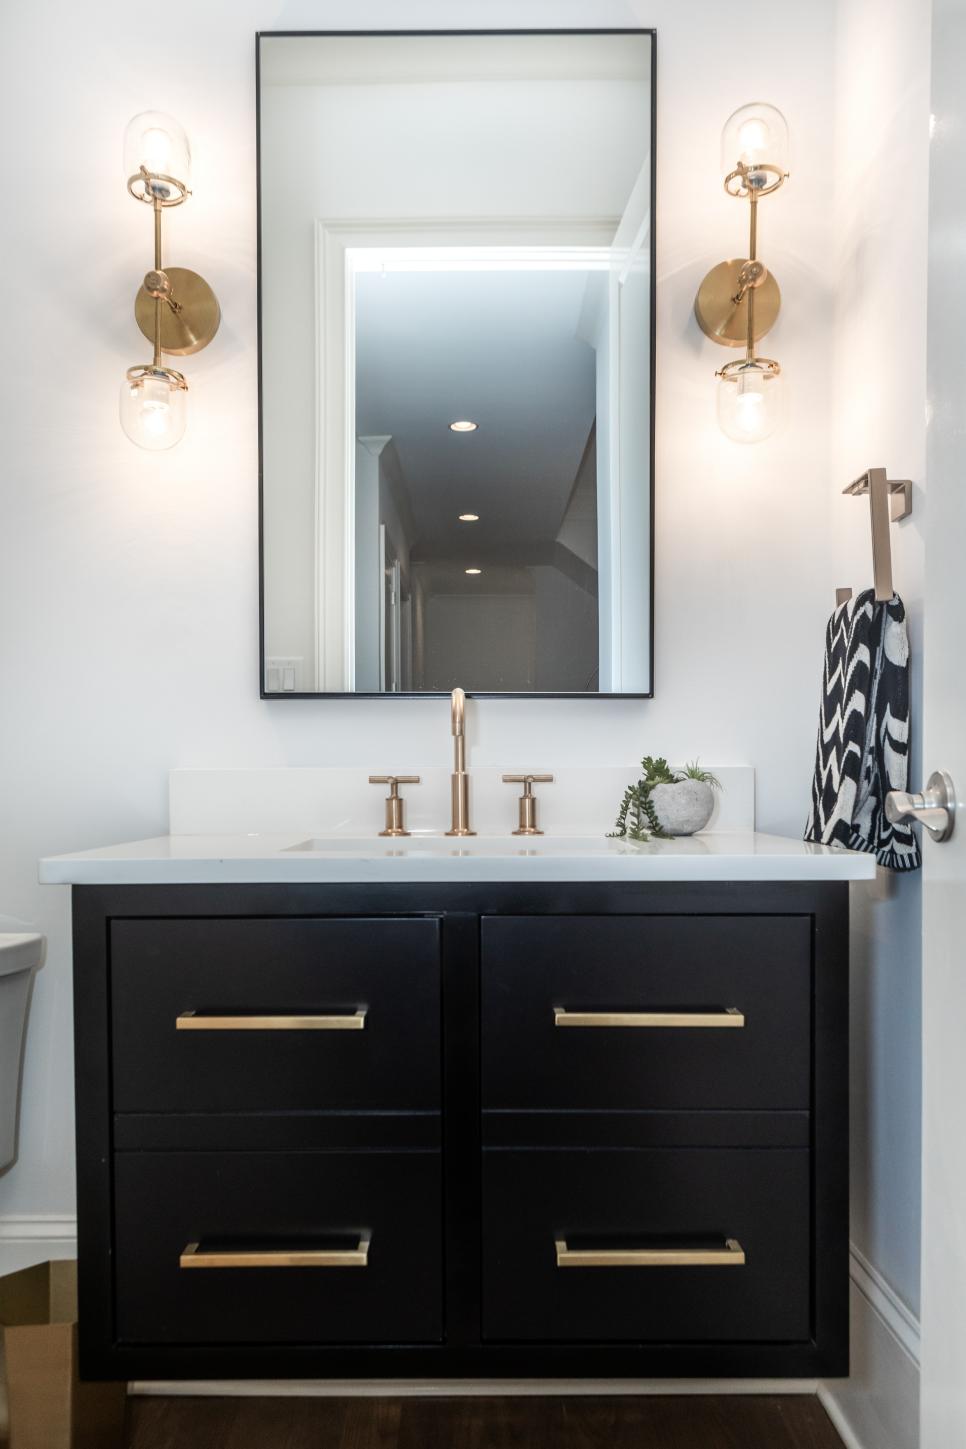 Powder Room Has Black Vanity With GoldToned Faucet and